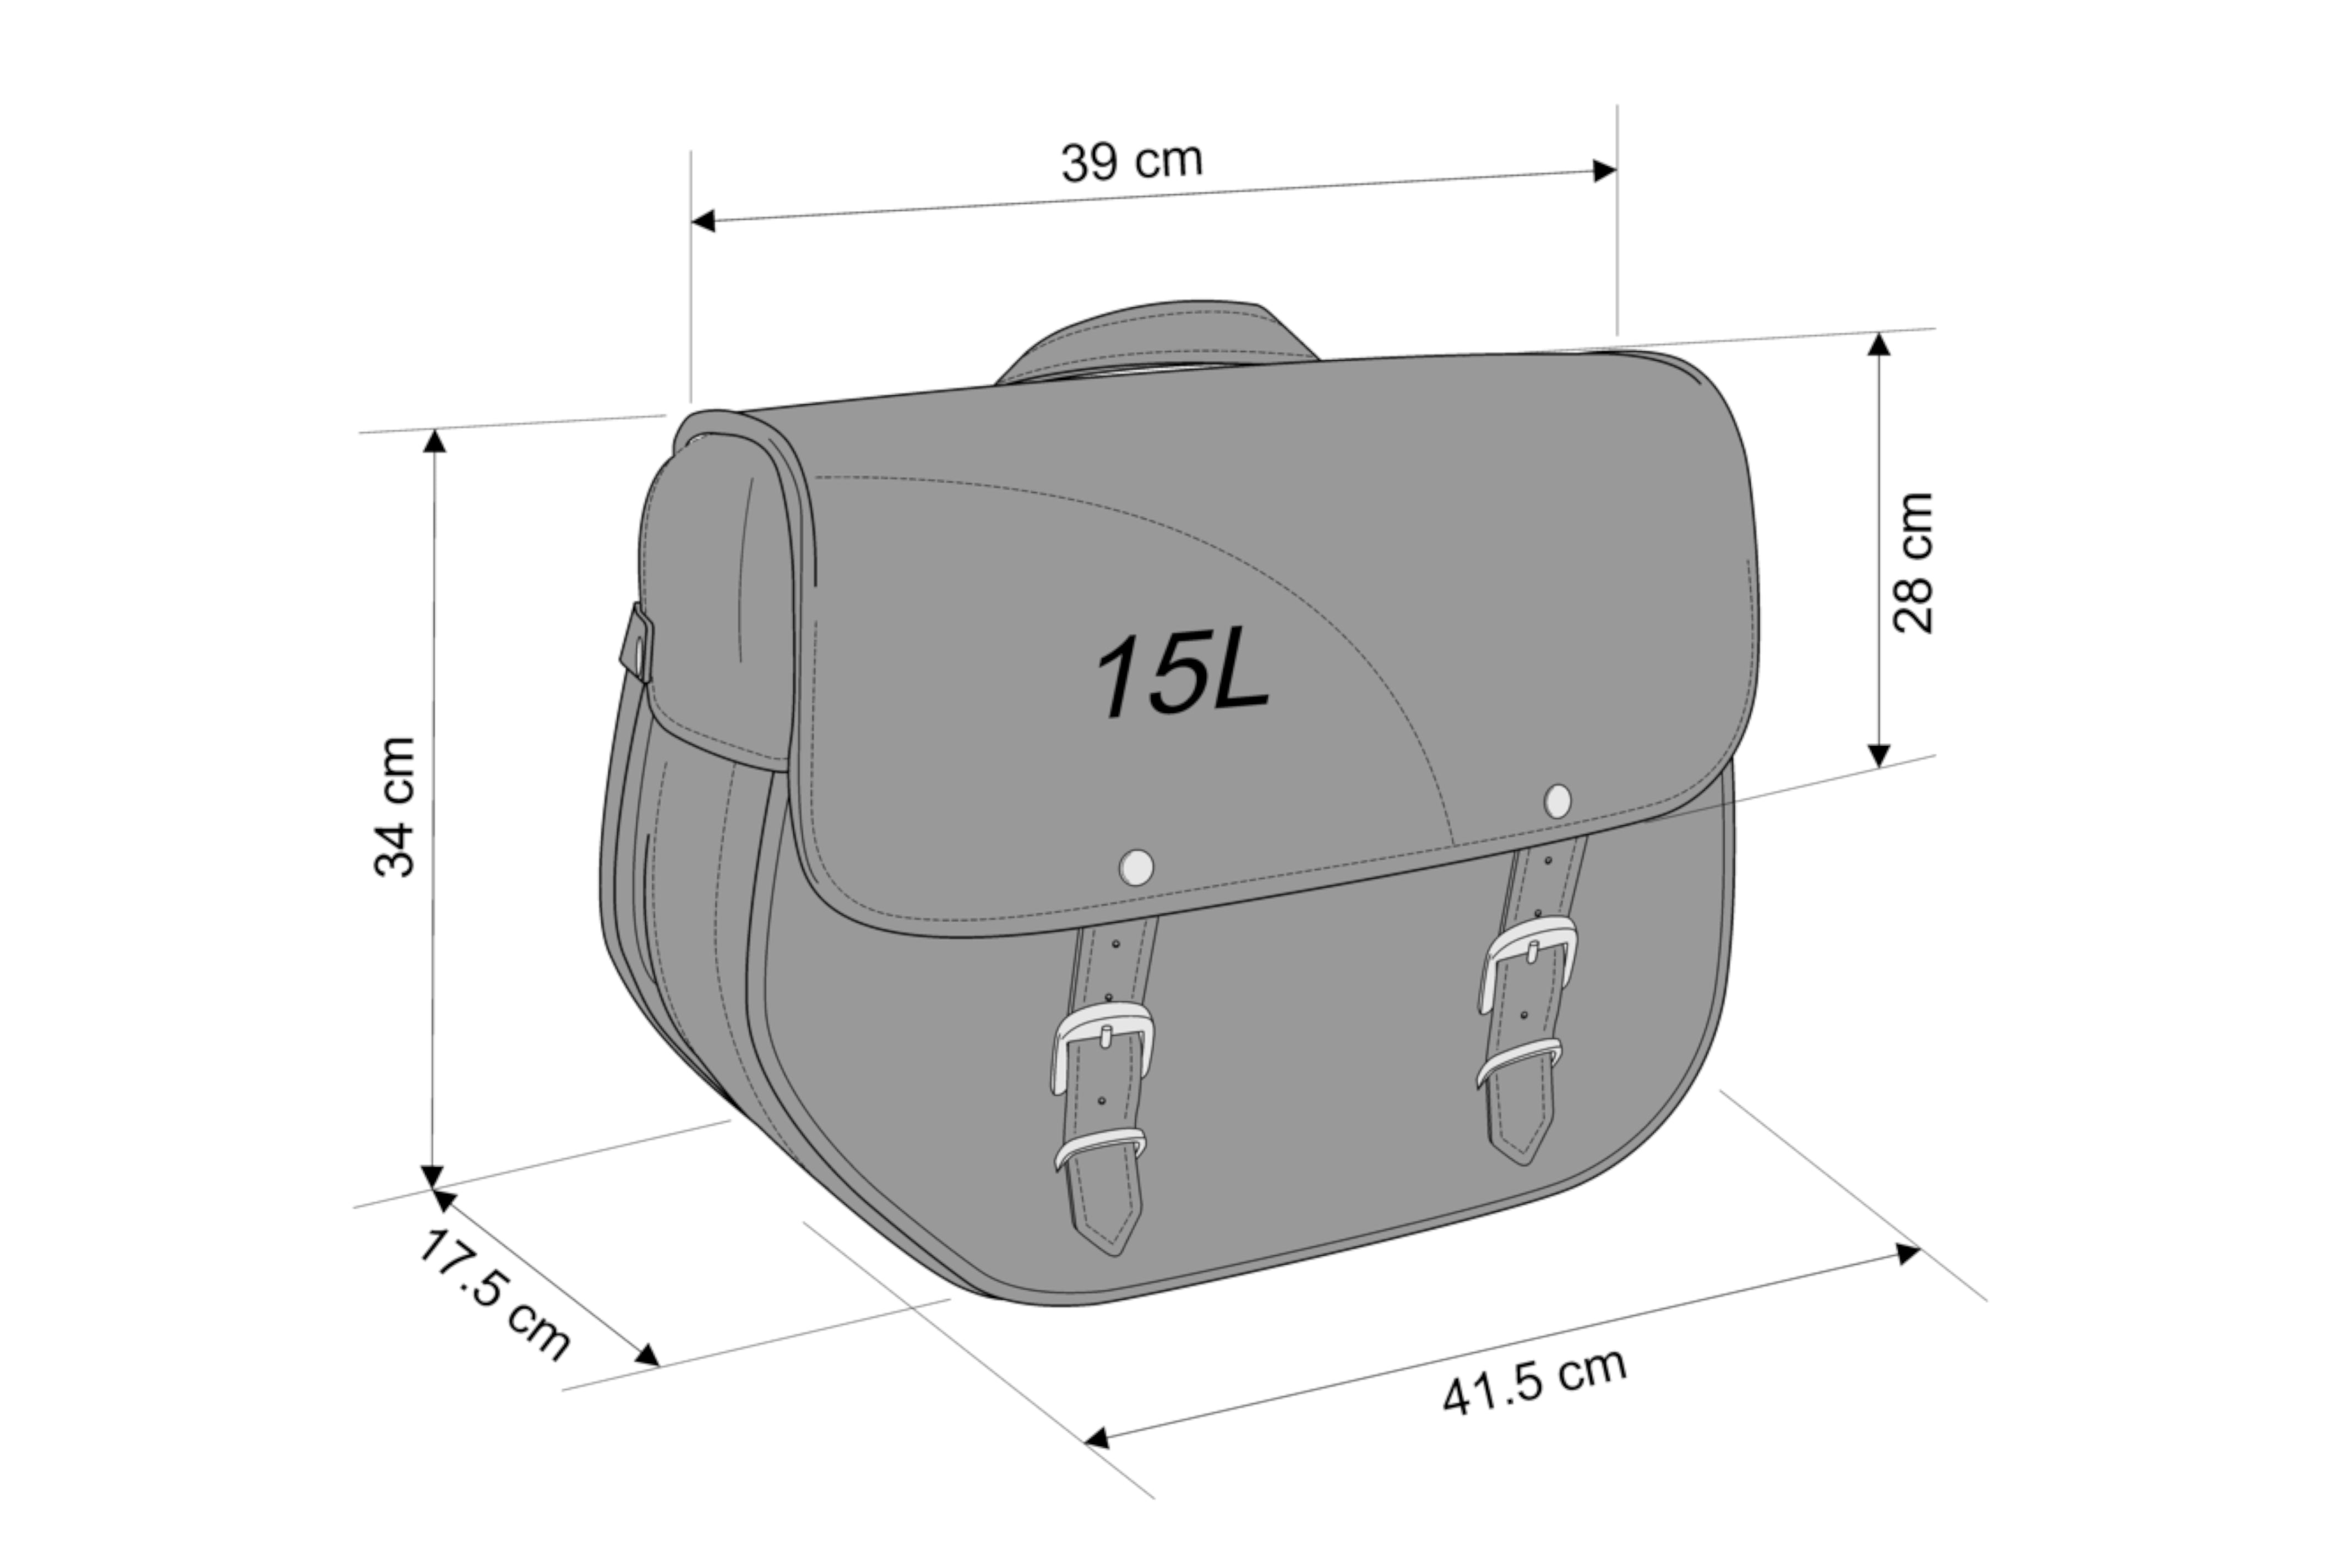 Customacces Sant Louis Saddlebags Without Metal Base - No Support Included | Harley Davidson Sportster 1200 Roadster (XL1200R) 2004>2008-XAPS001N-Storage-Pyramid Plastics